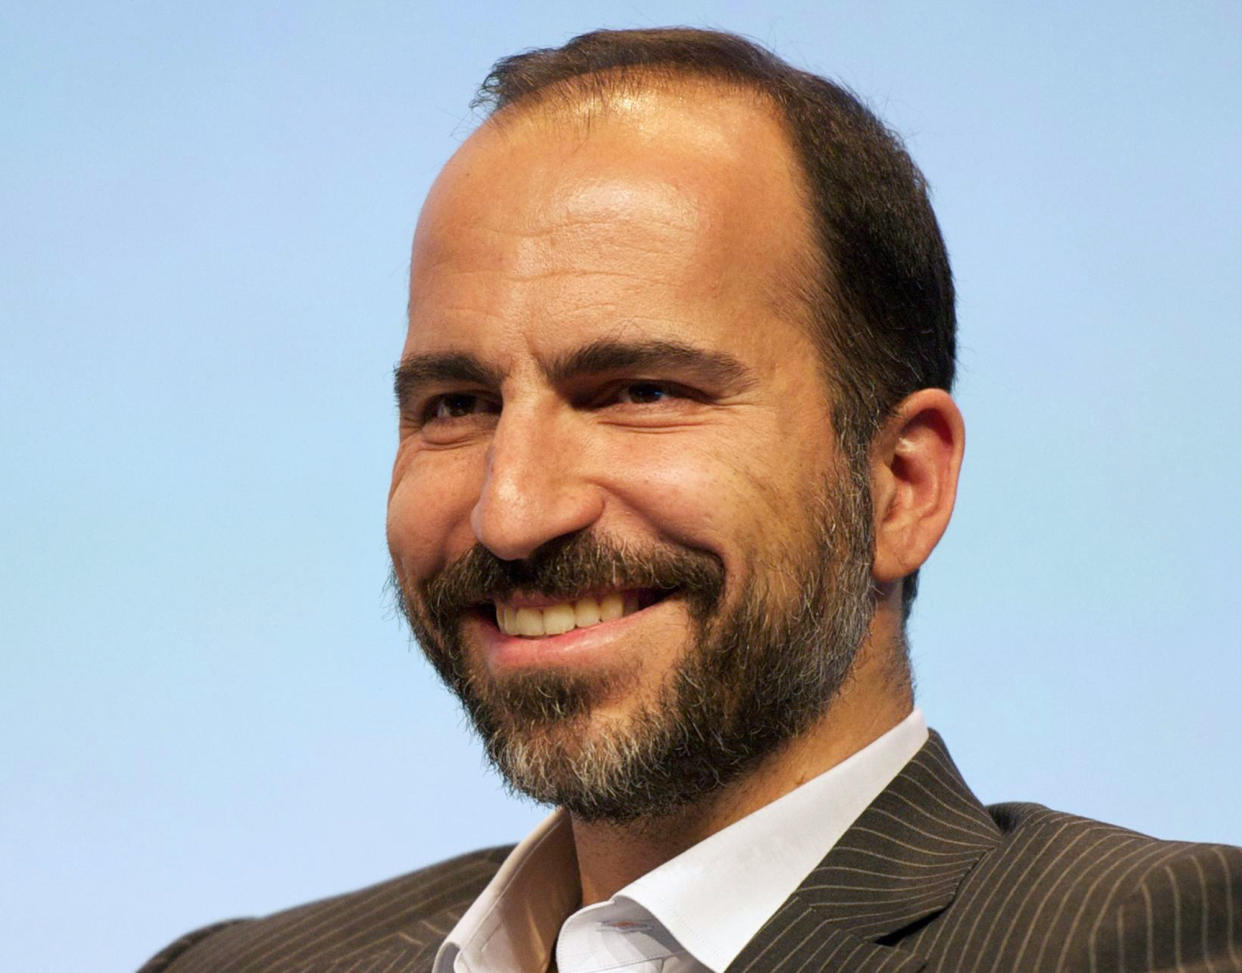 Expedia CEO Dara Khosrowshahi is expected to take the role of Uber’s new chief executive. (Courtesy of Expedia, Inc. via AP)